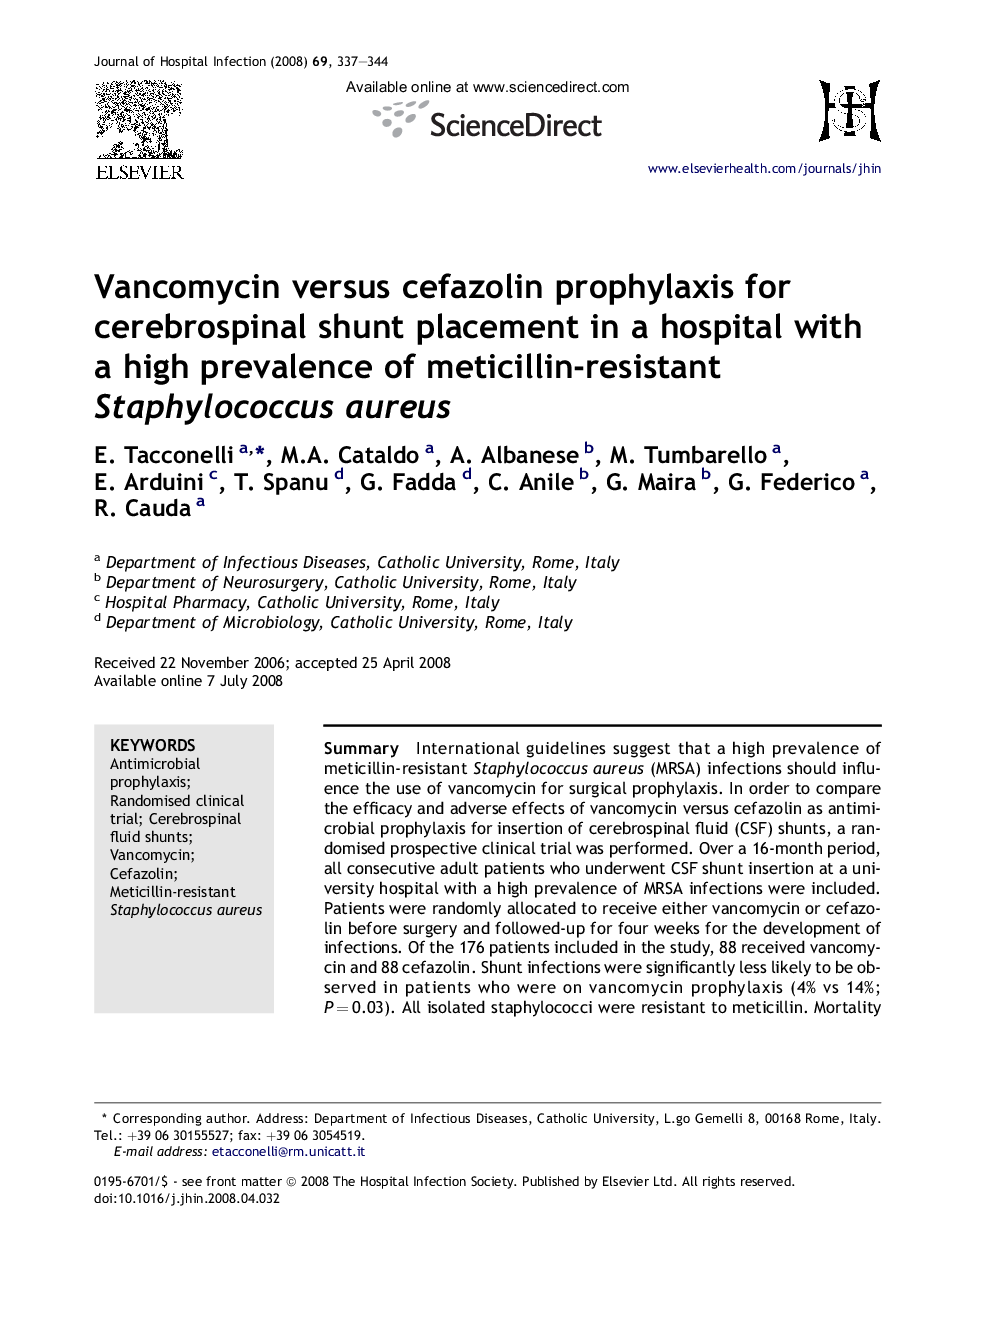 Vancomycin versus cefazolin prophylaxis for cerebrospinal shunt placement in a hospital with a high prevalence of meticillin-resistant Staphylococcus aureus